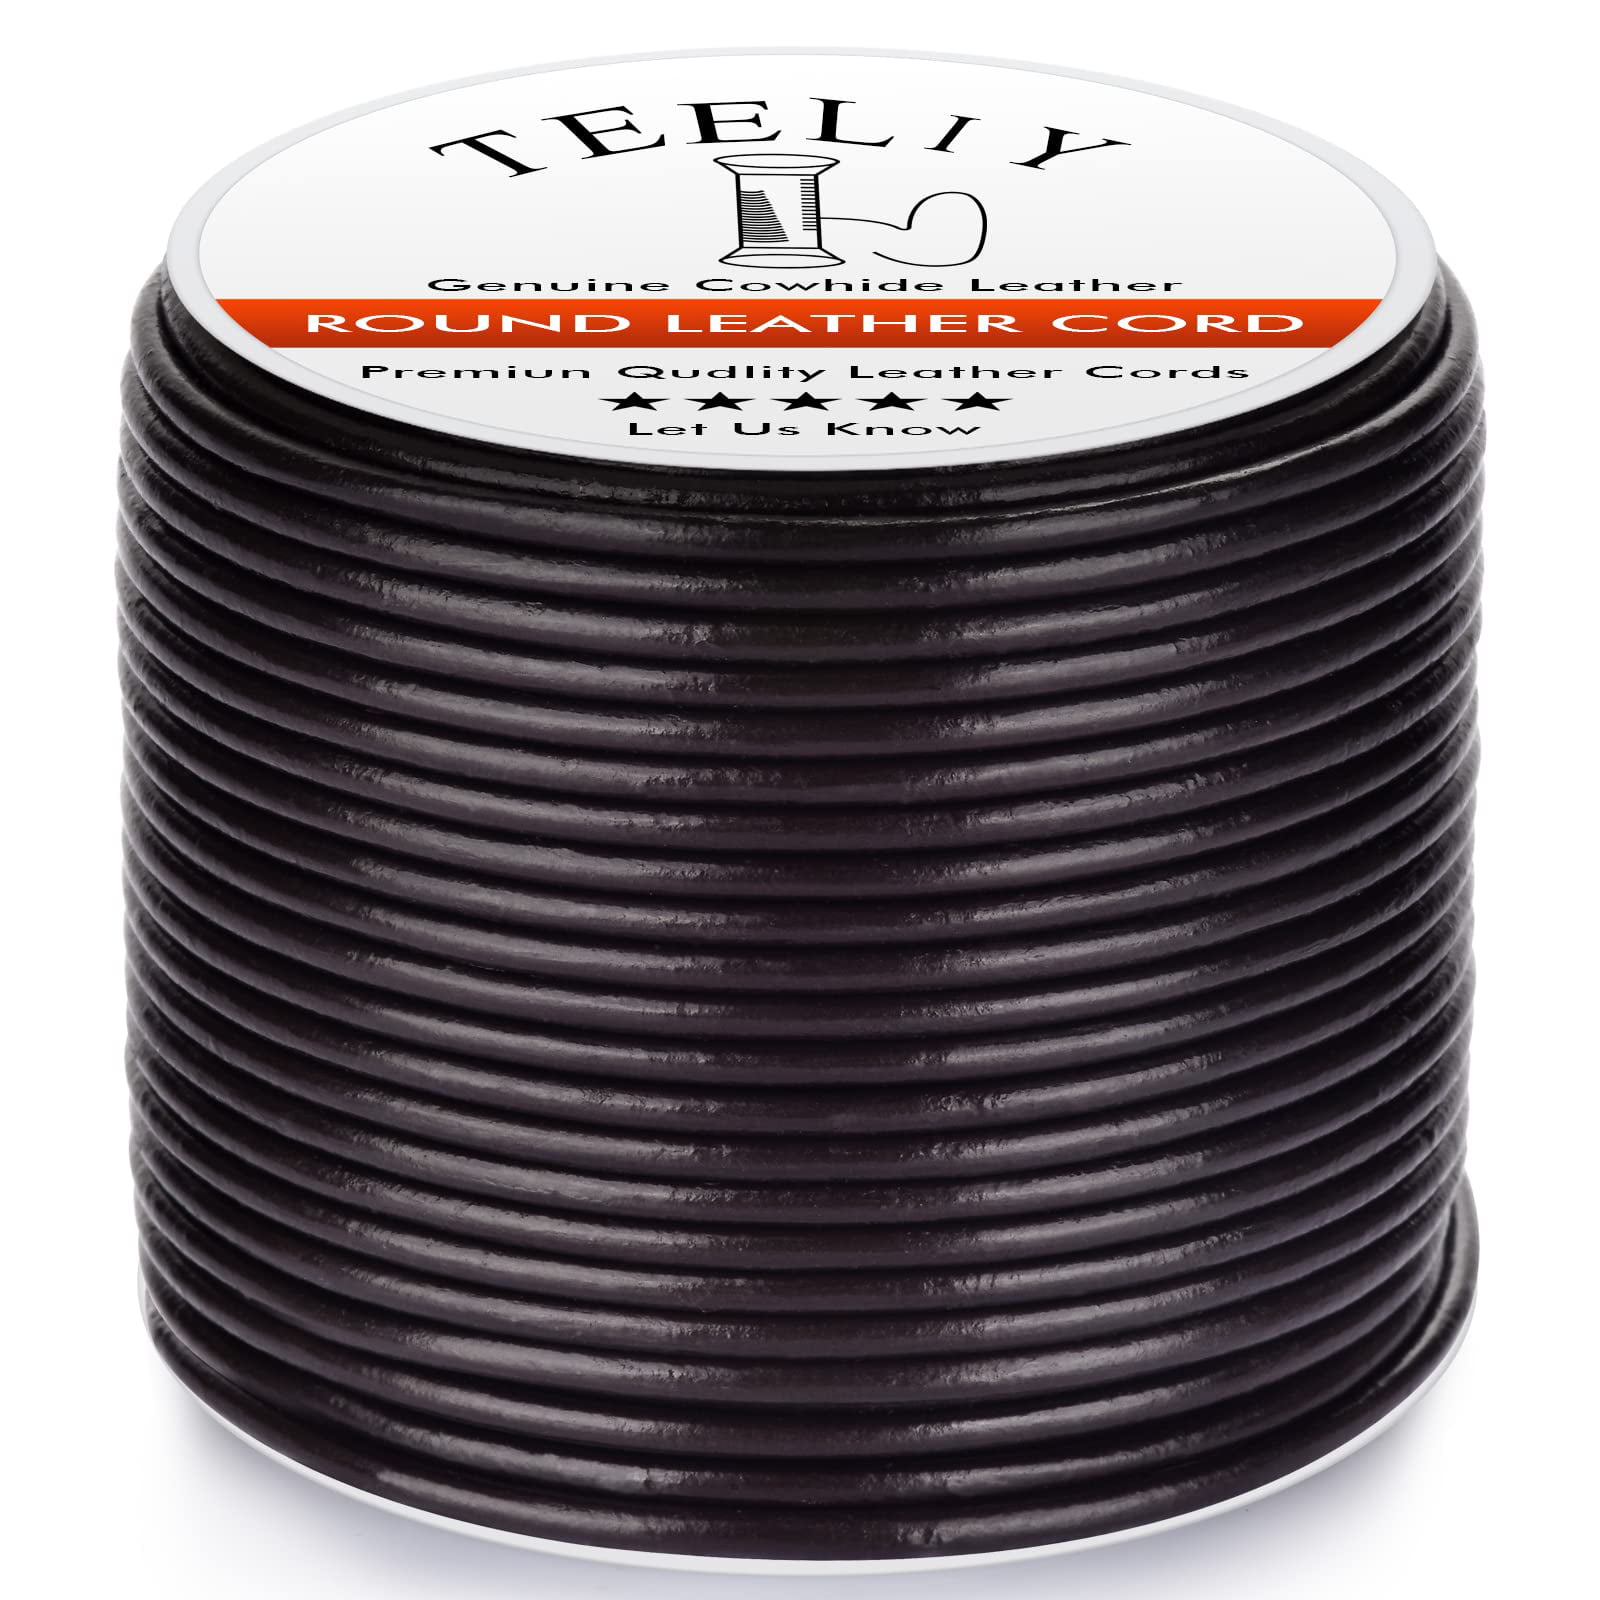 TeeLiy 3mm Flat Genuine Leather Cord - Natural Leather Lacing - Strip Cord Braiding String for Jewelry Making Braided Bracelets Necklaces Handbags